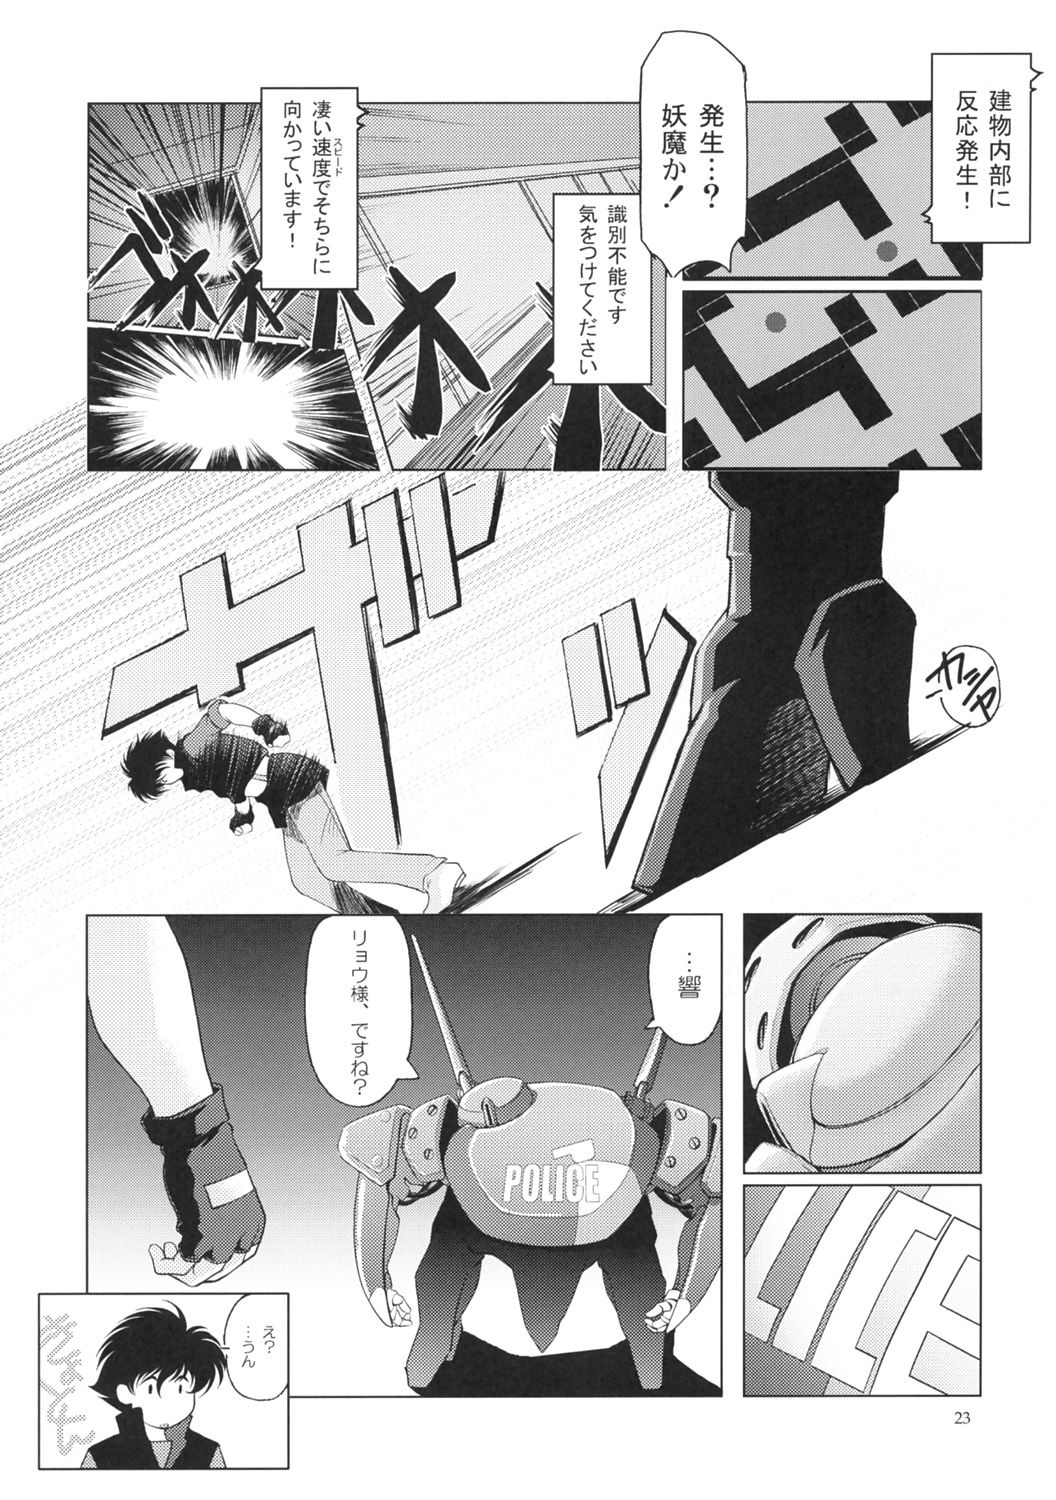 (C67) [Type-R (Rance)] Manga Onsoku no Are (Sonic Soldier Borgman) page 24 full